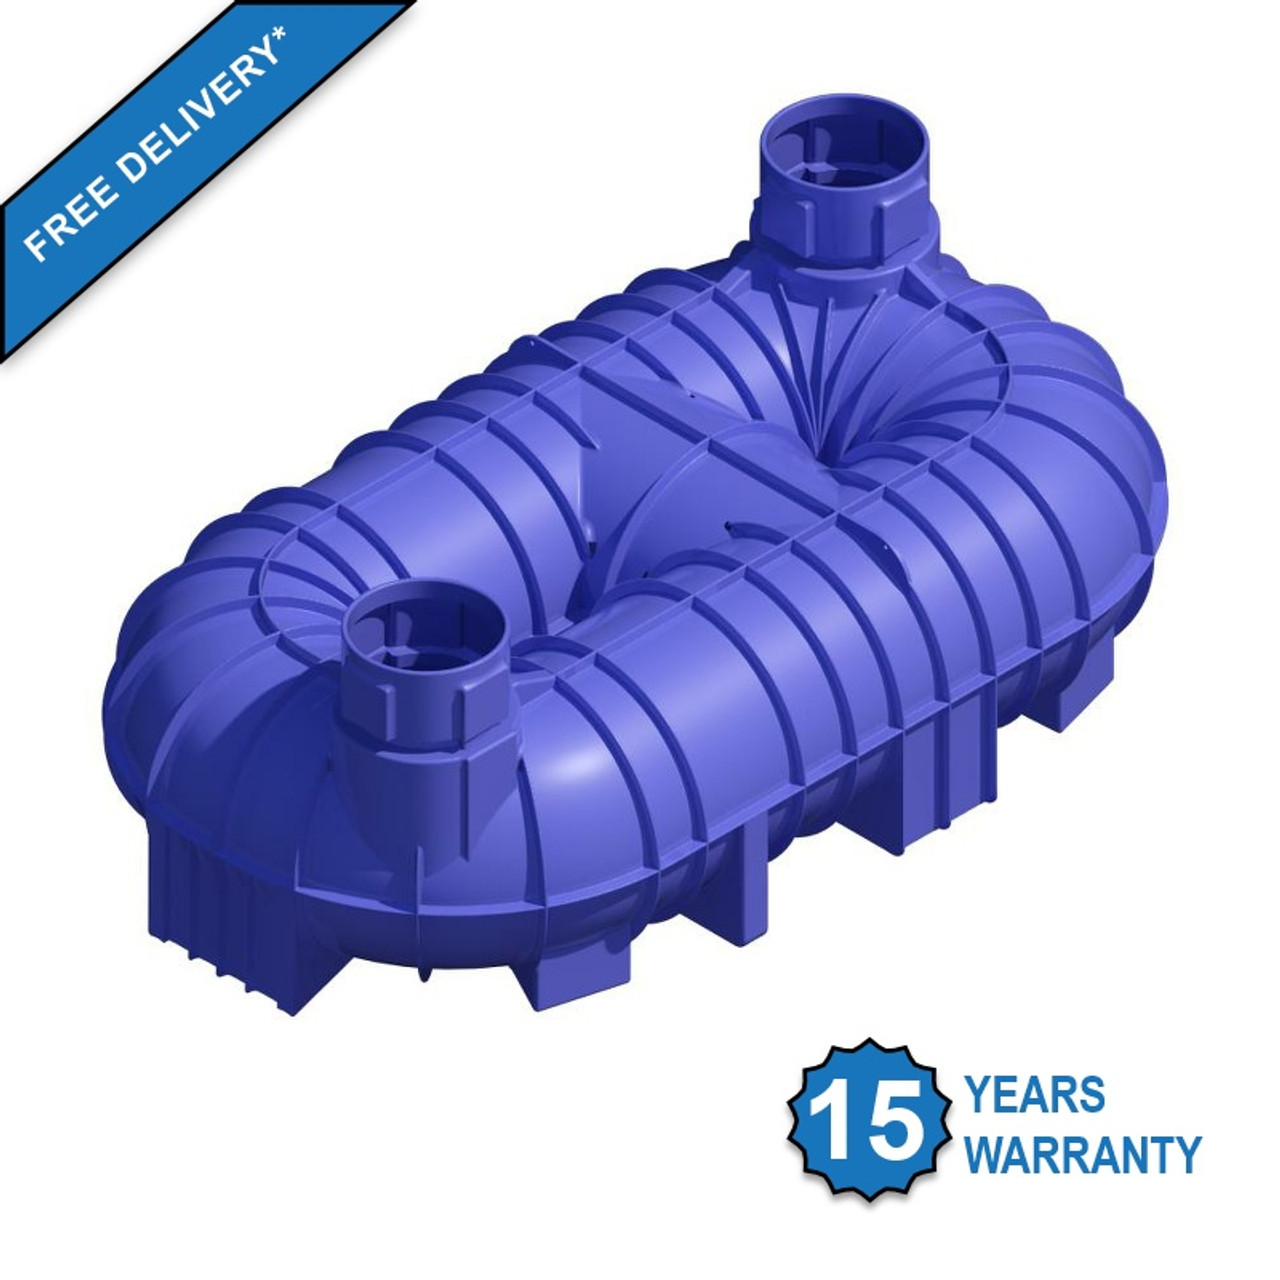 10000 Litre (2200 Gallon) Underground Potable Water Tank (Twin Access) - Free Delivery & 15 Year Warranty